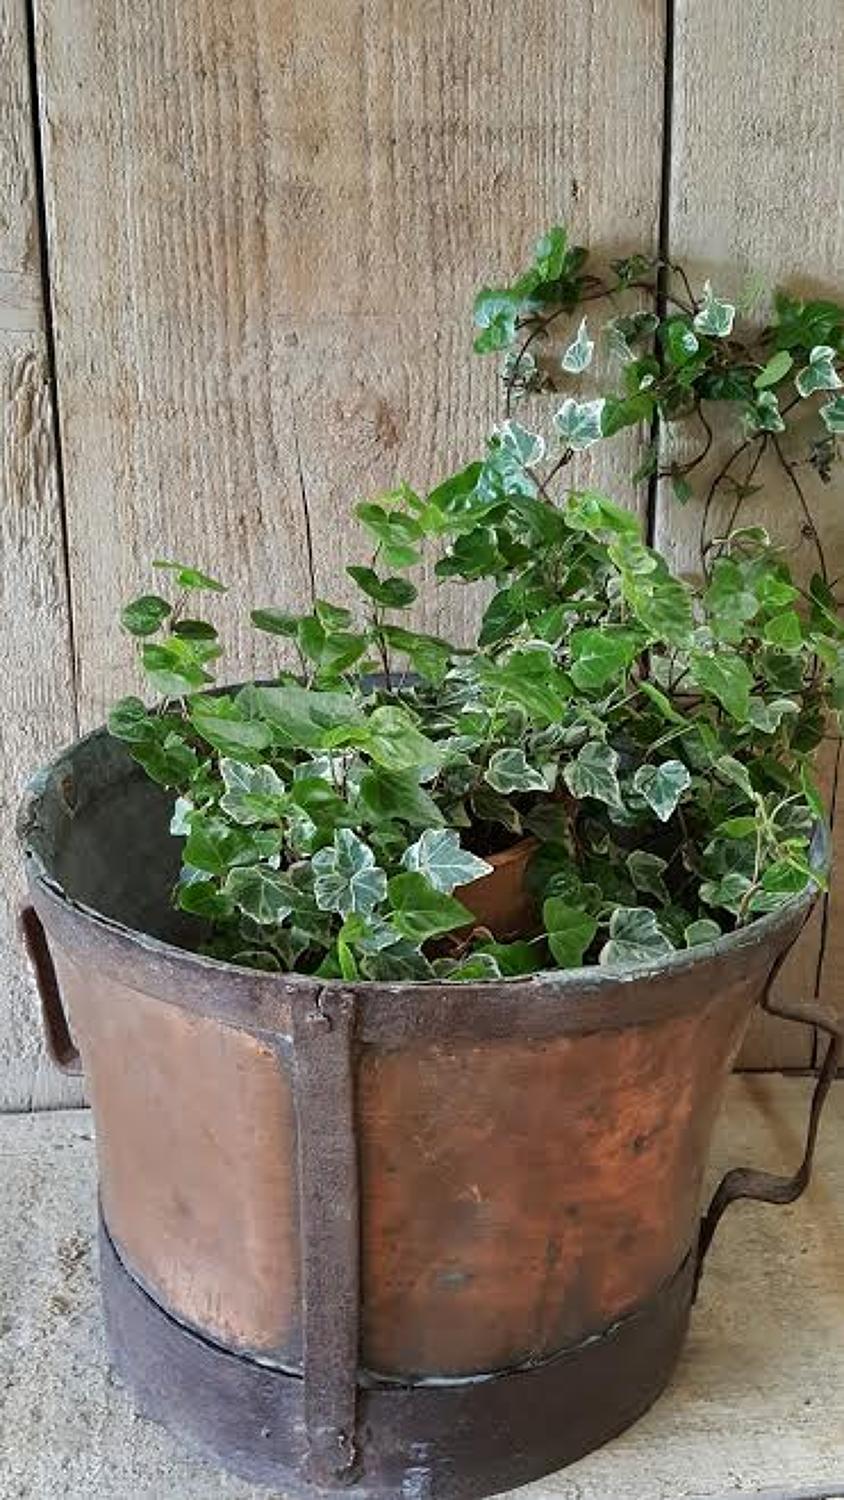 French Copper Pot